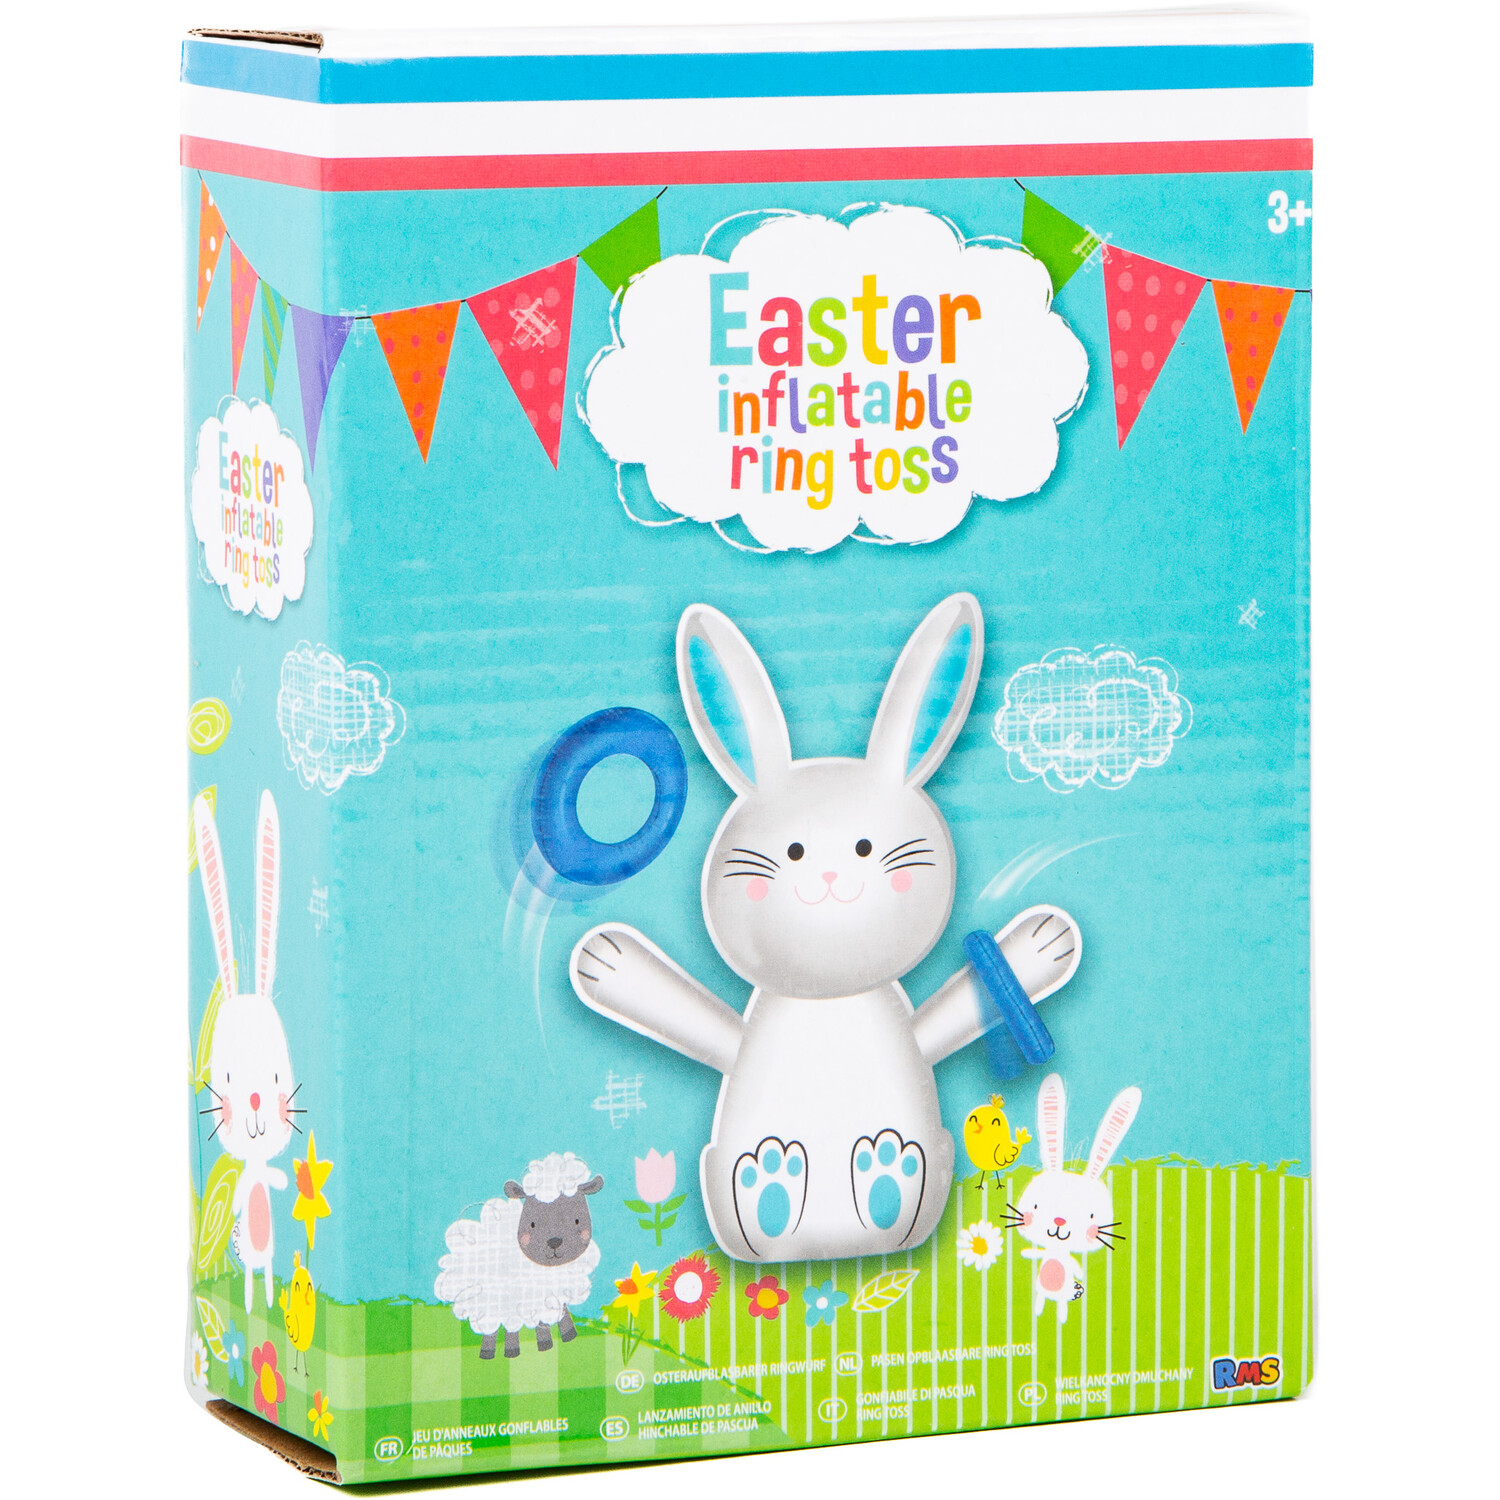 Easter Inflatable Ring Toss - White Image 1